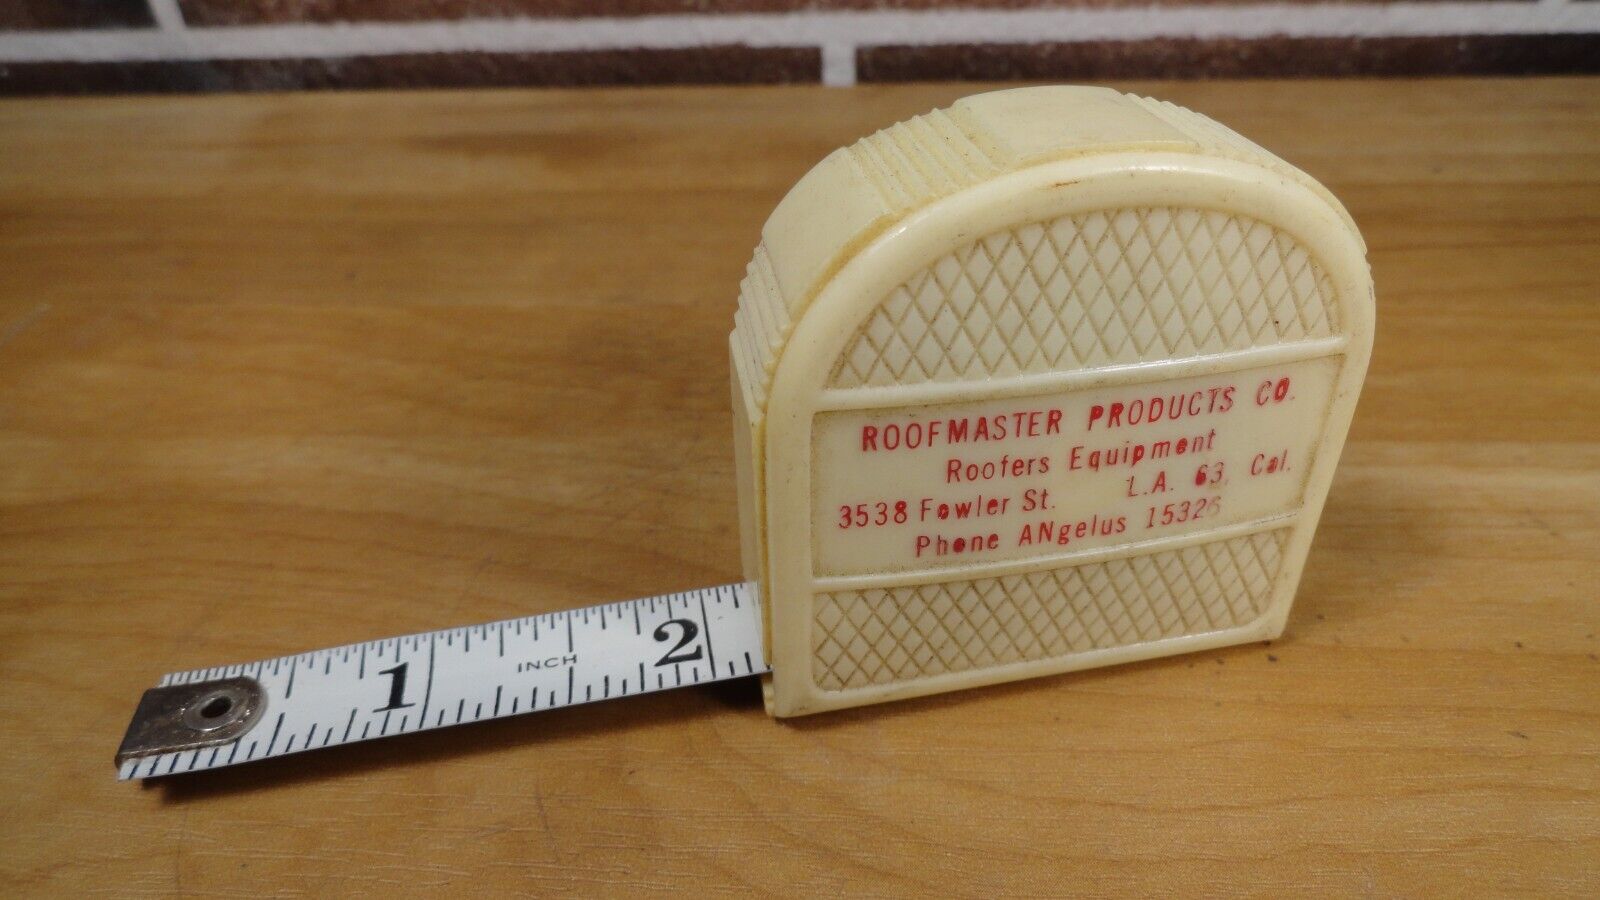 Vintage Advertising Tape Measure Roofmaster Products Co. Los Angeles Ca.